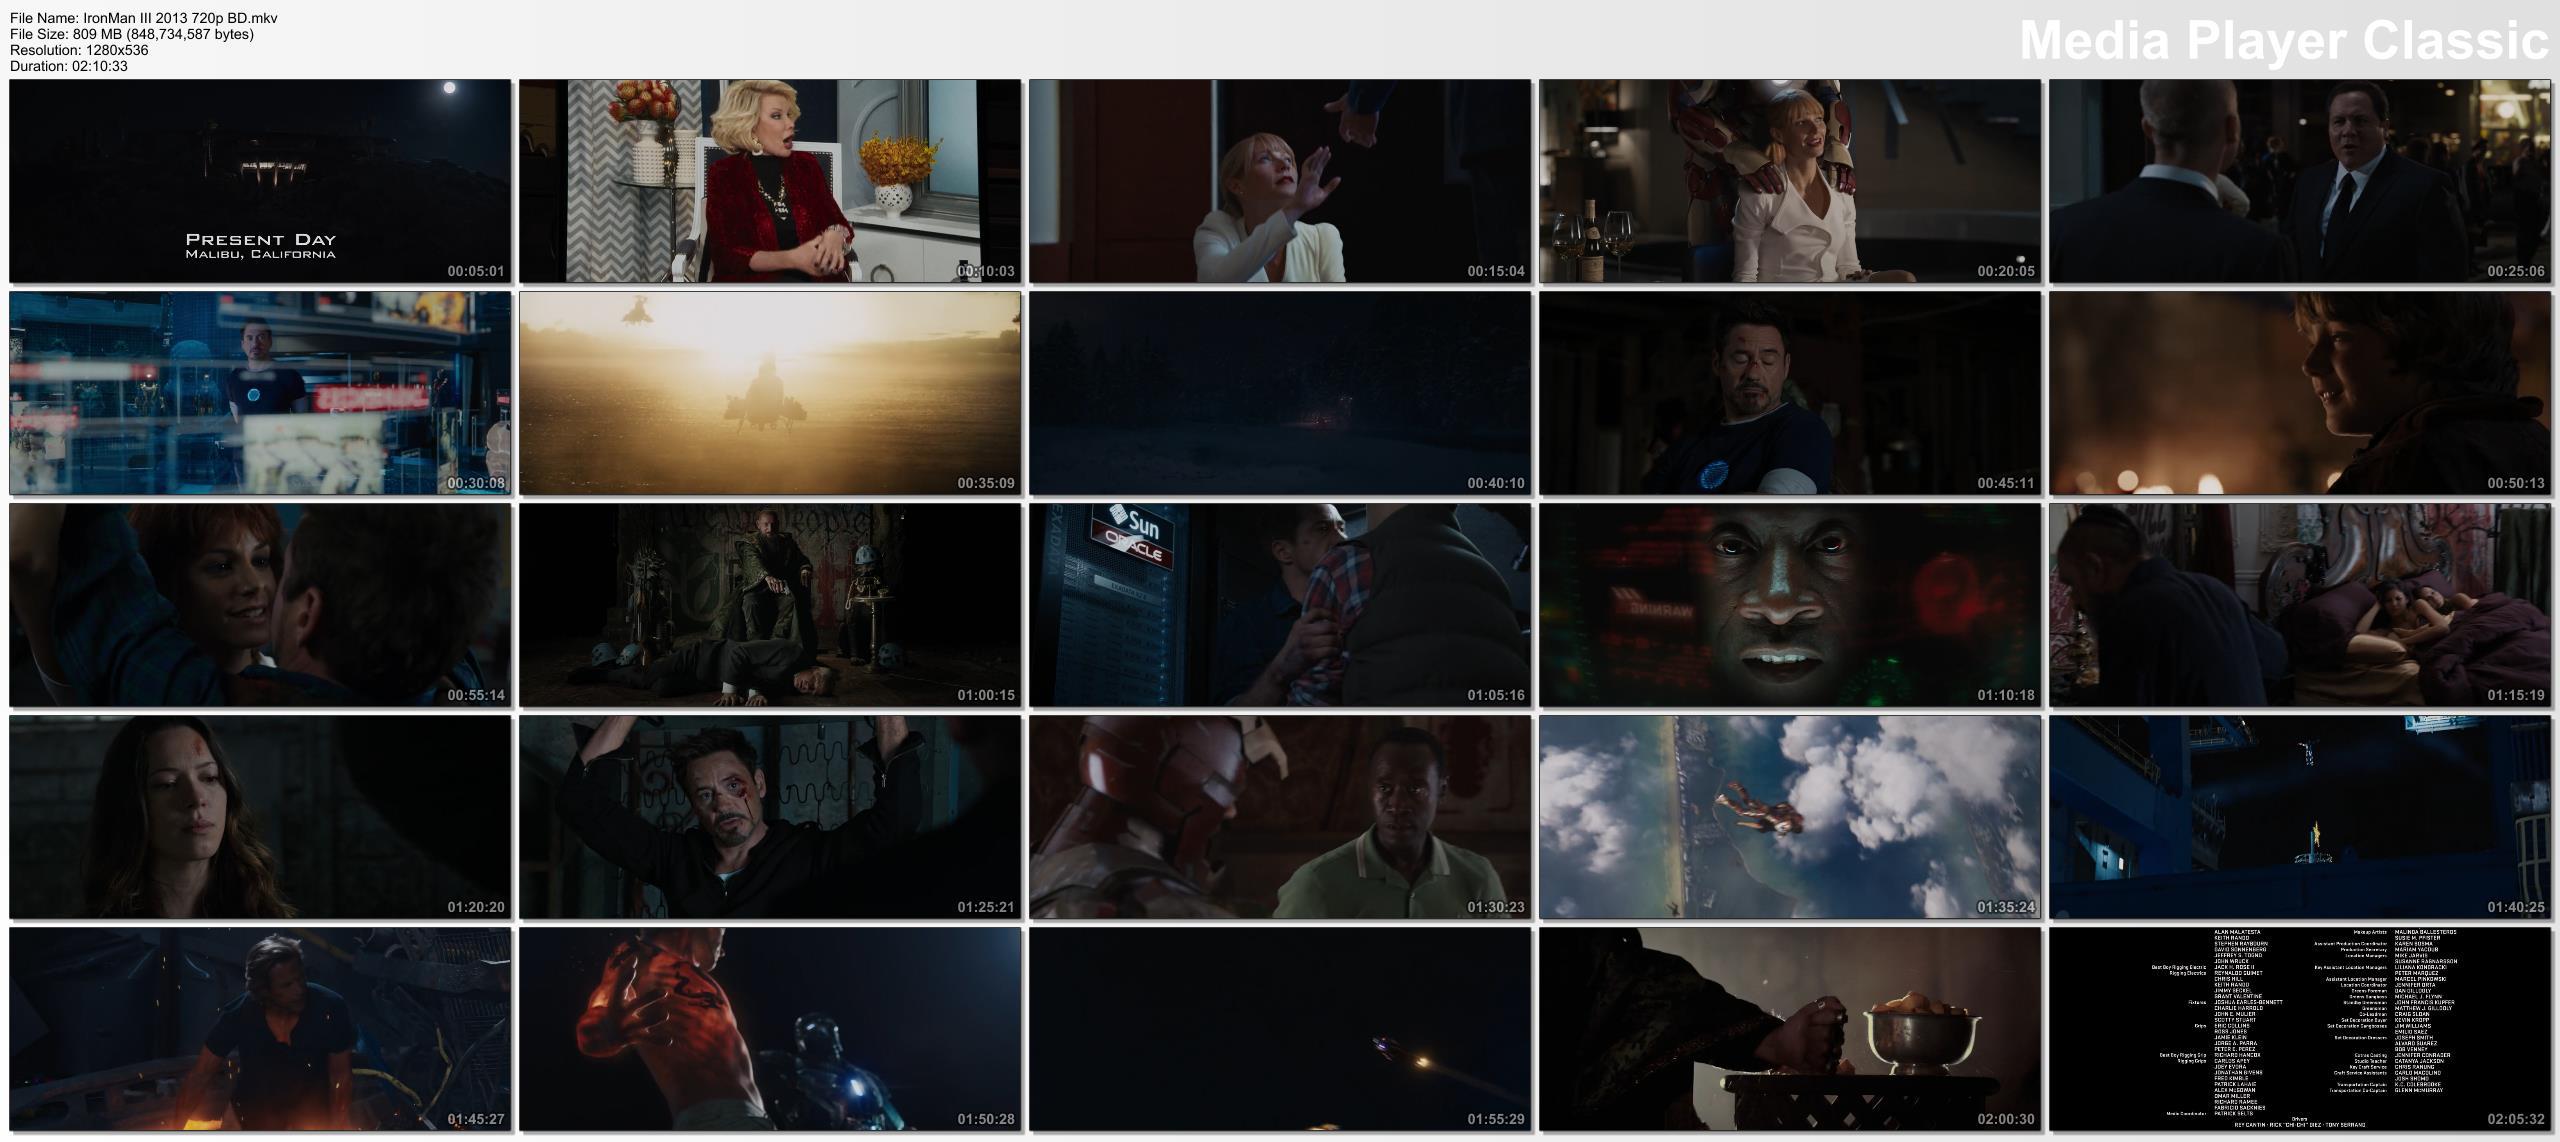 IronMan III 2013 720p BD mkv preview 0